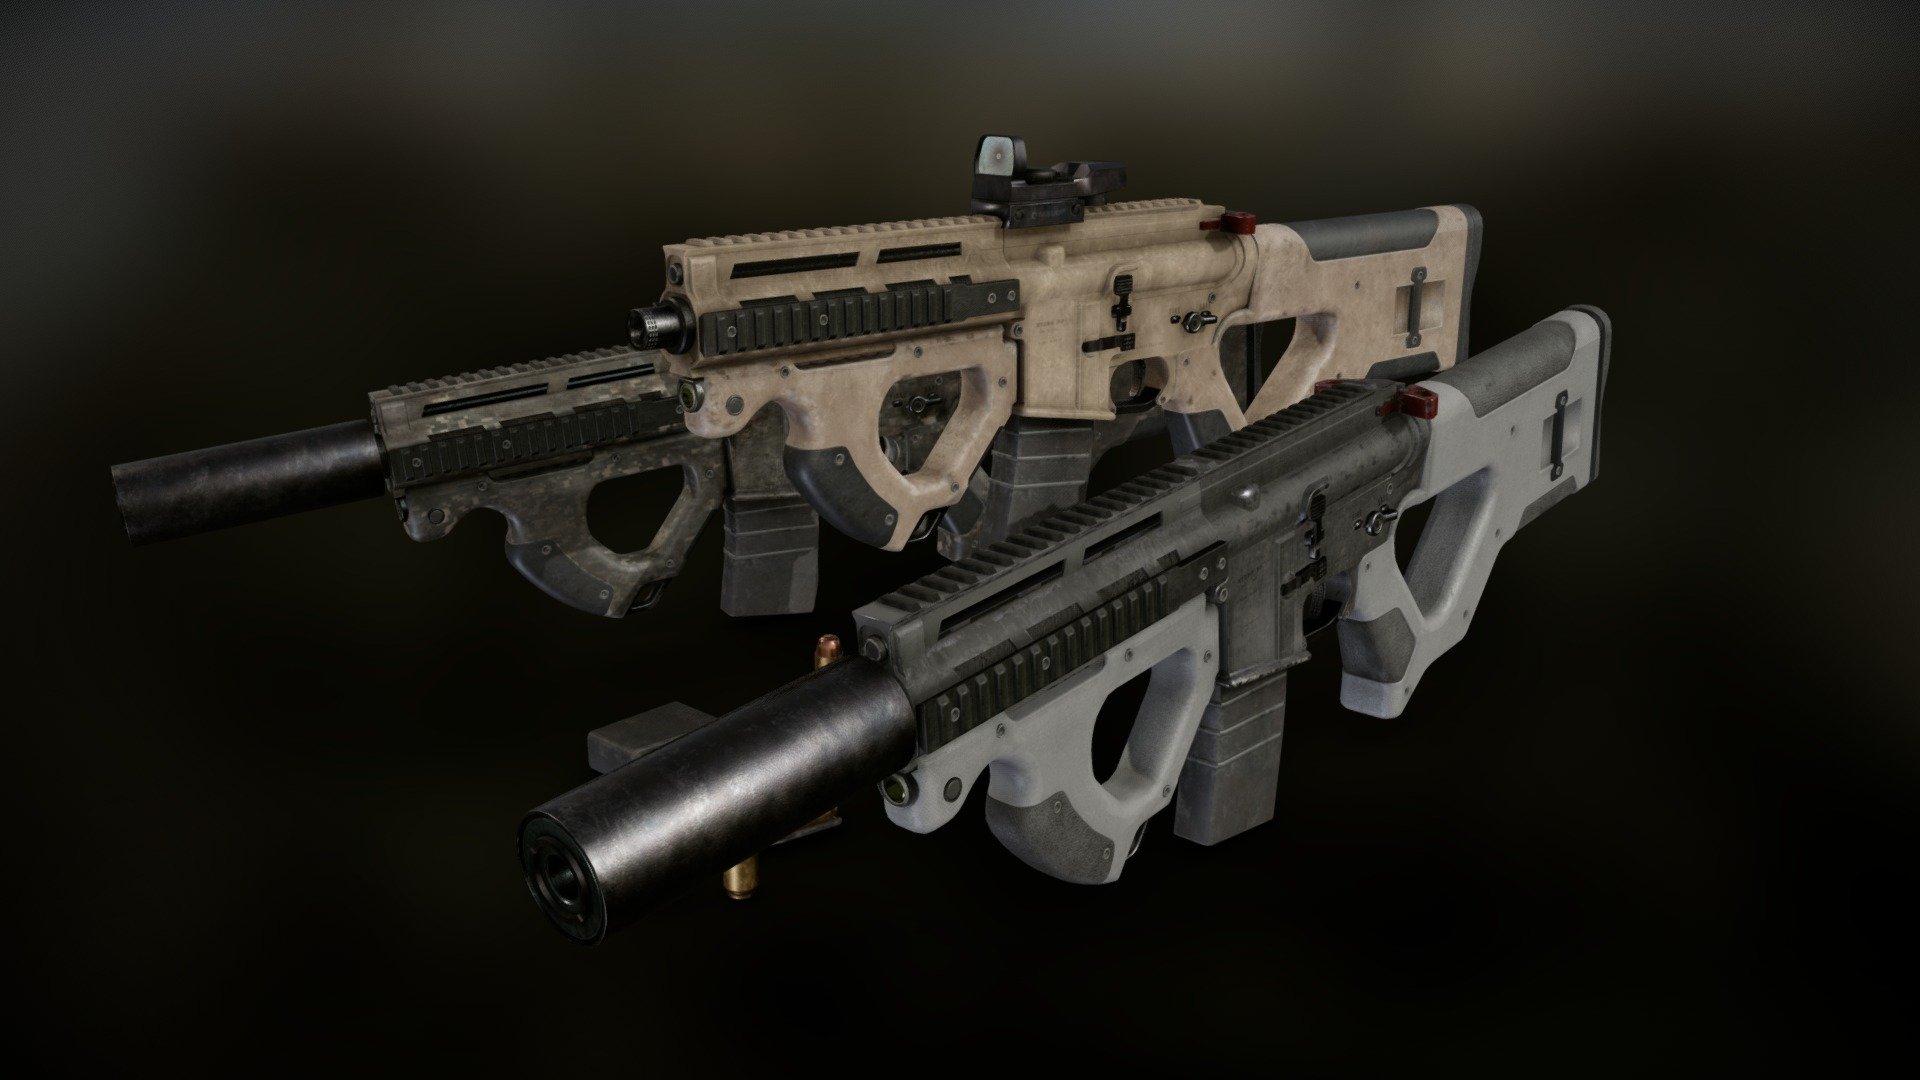 UPDATE!
Model is now rigged and optimized better(reduced vertex numbers)

Heavily modified AR with Hera CQR cuttstock and front grip that shoot 50.cal Beuwulf ammo(12.7x42) and with removed Forward Assist because its annoying and useless in real life, model and in any situation you can imagine.

There are 3 versions of textures: White/Gray Sand and Camo.

Models are game-rady with 4k PBR materials.

Made in Blender 3d model